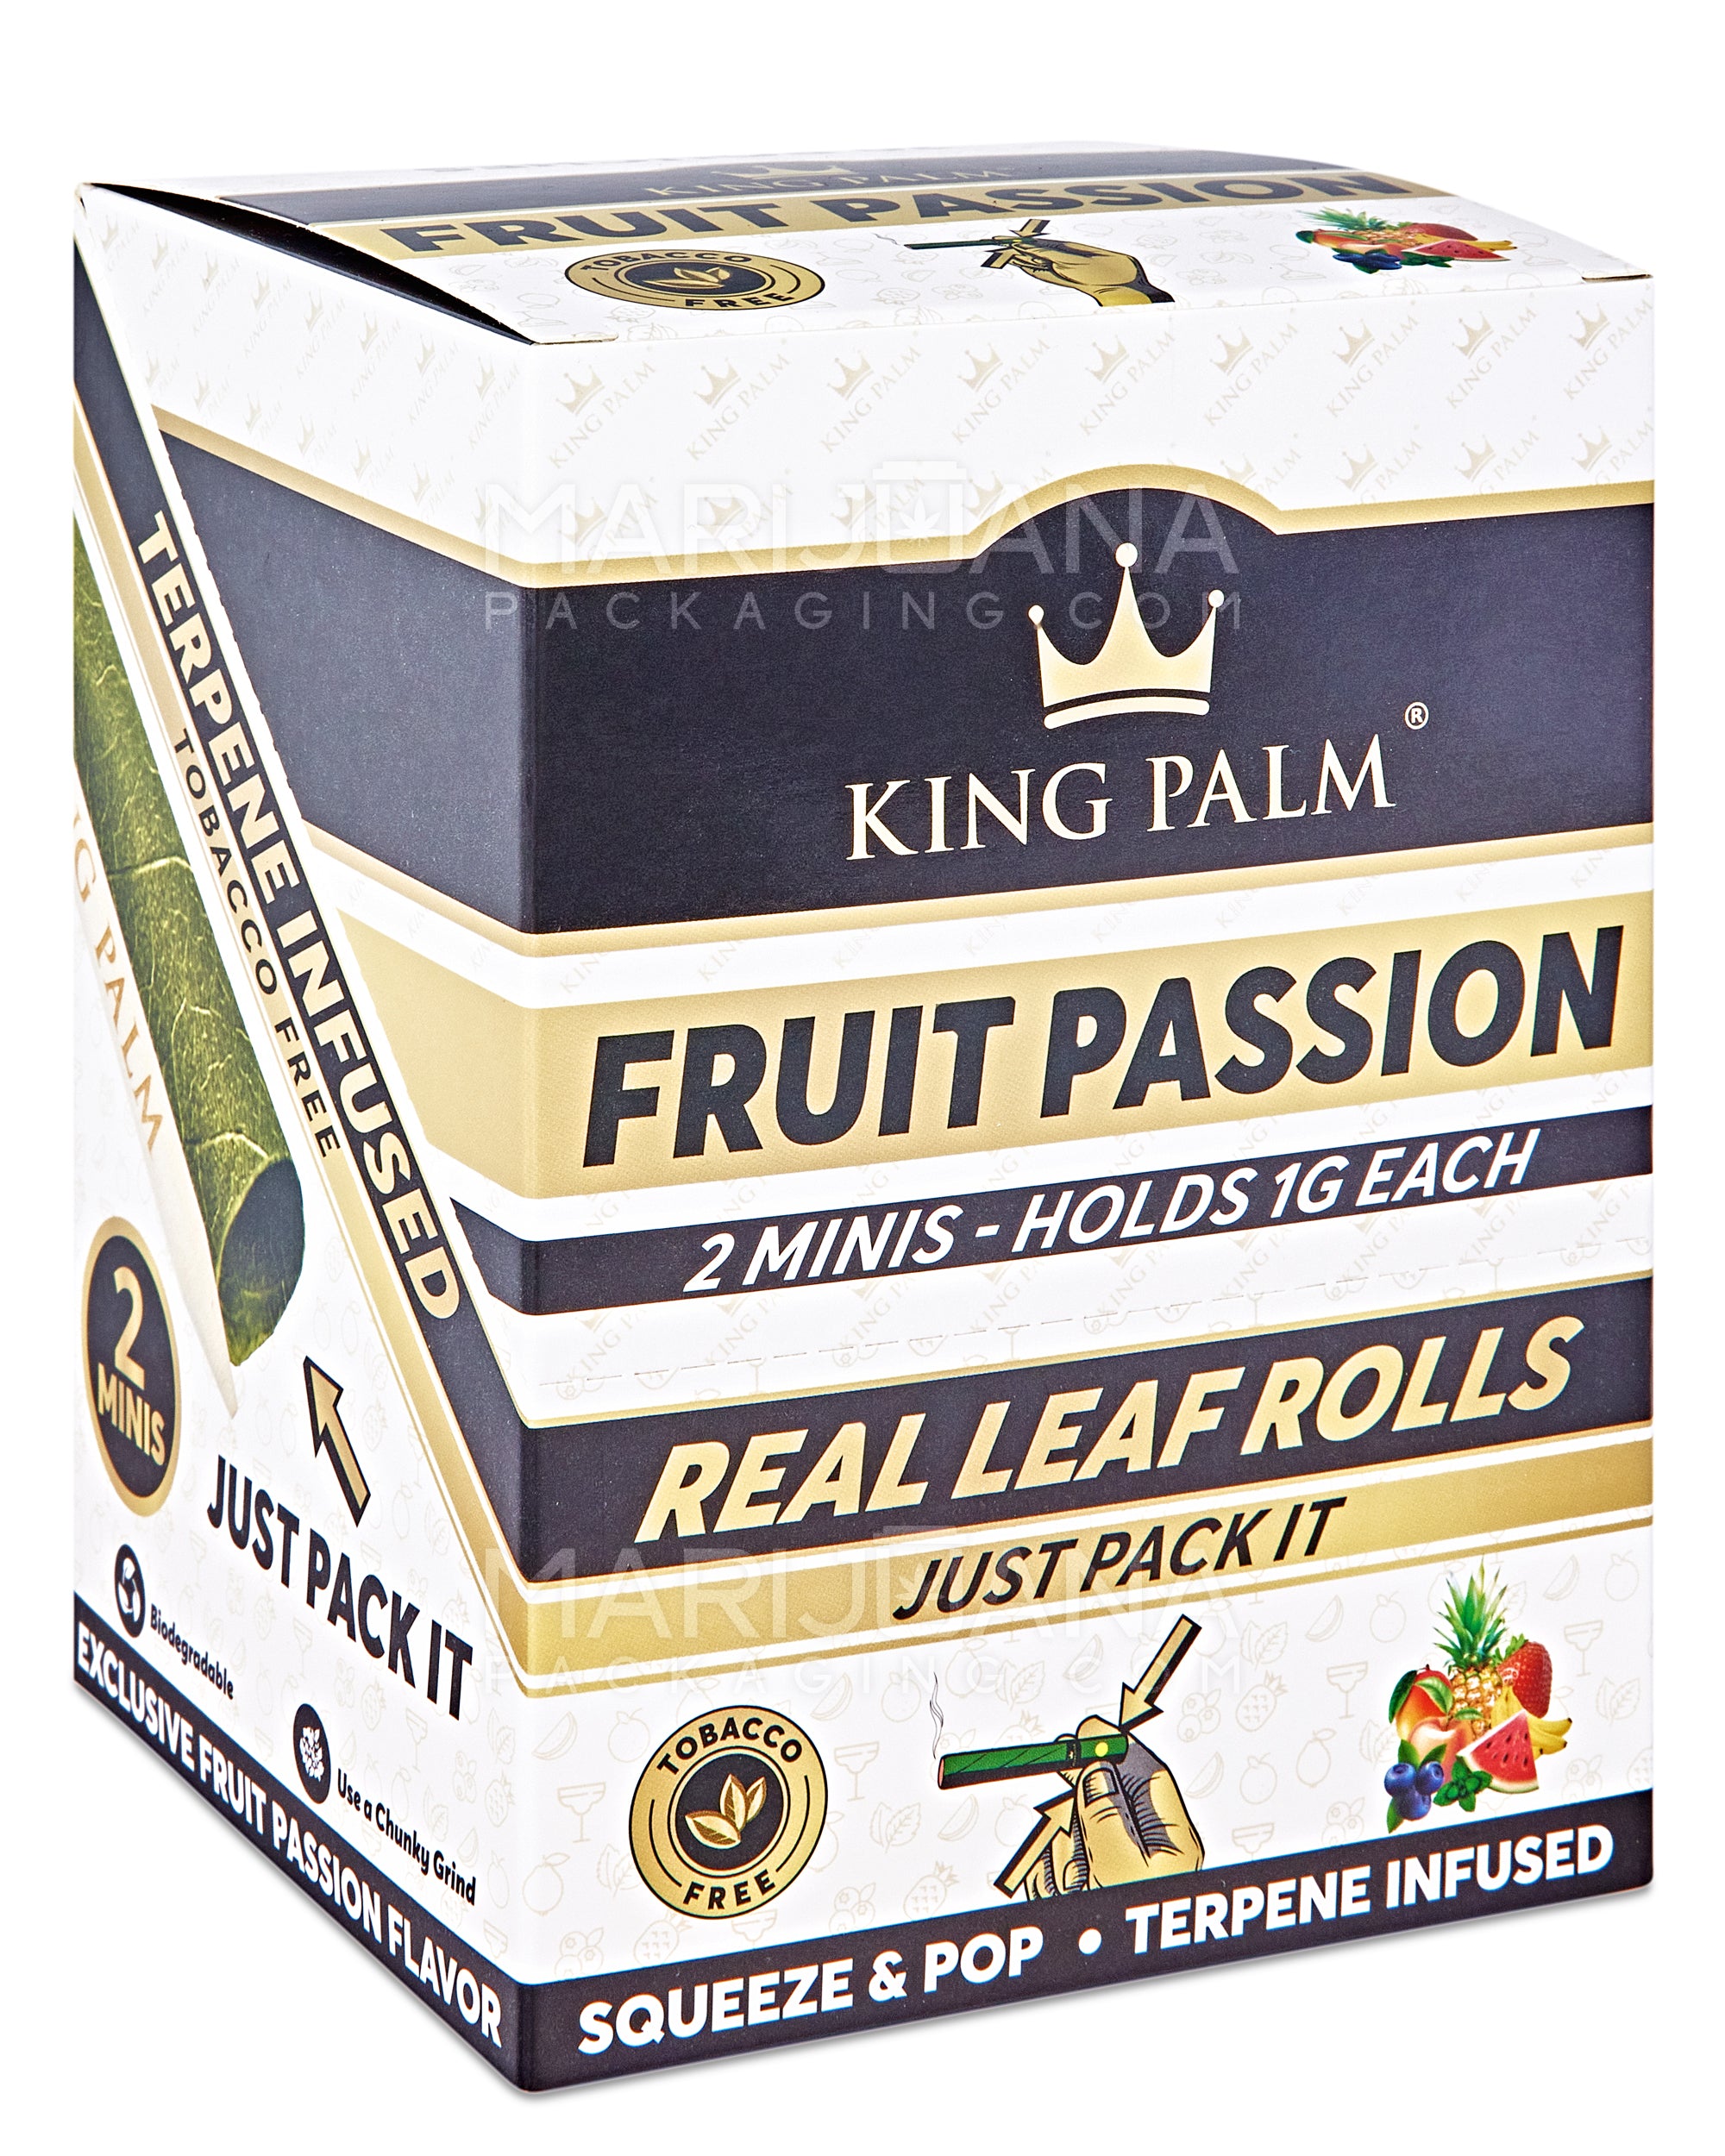 KING PALM | 'Retail Display' Natural Leaf Mini Rolls Blunt Wraps | 85mm - Fruit Passion - 20 Count - 2